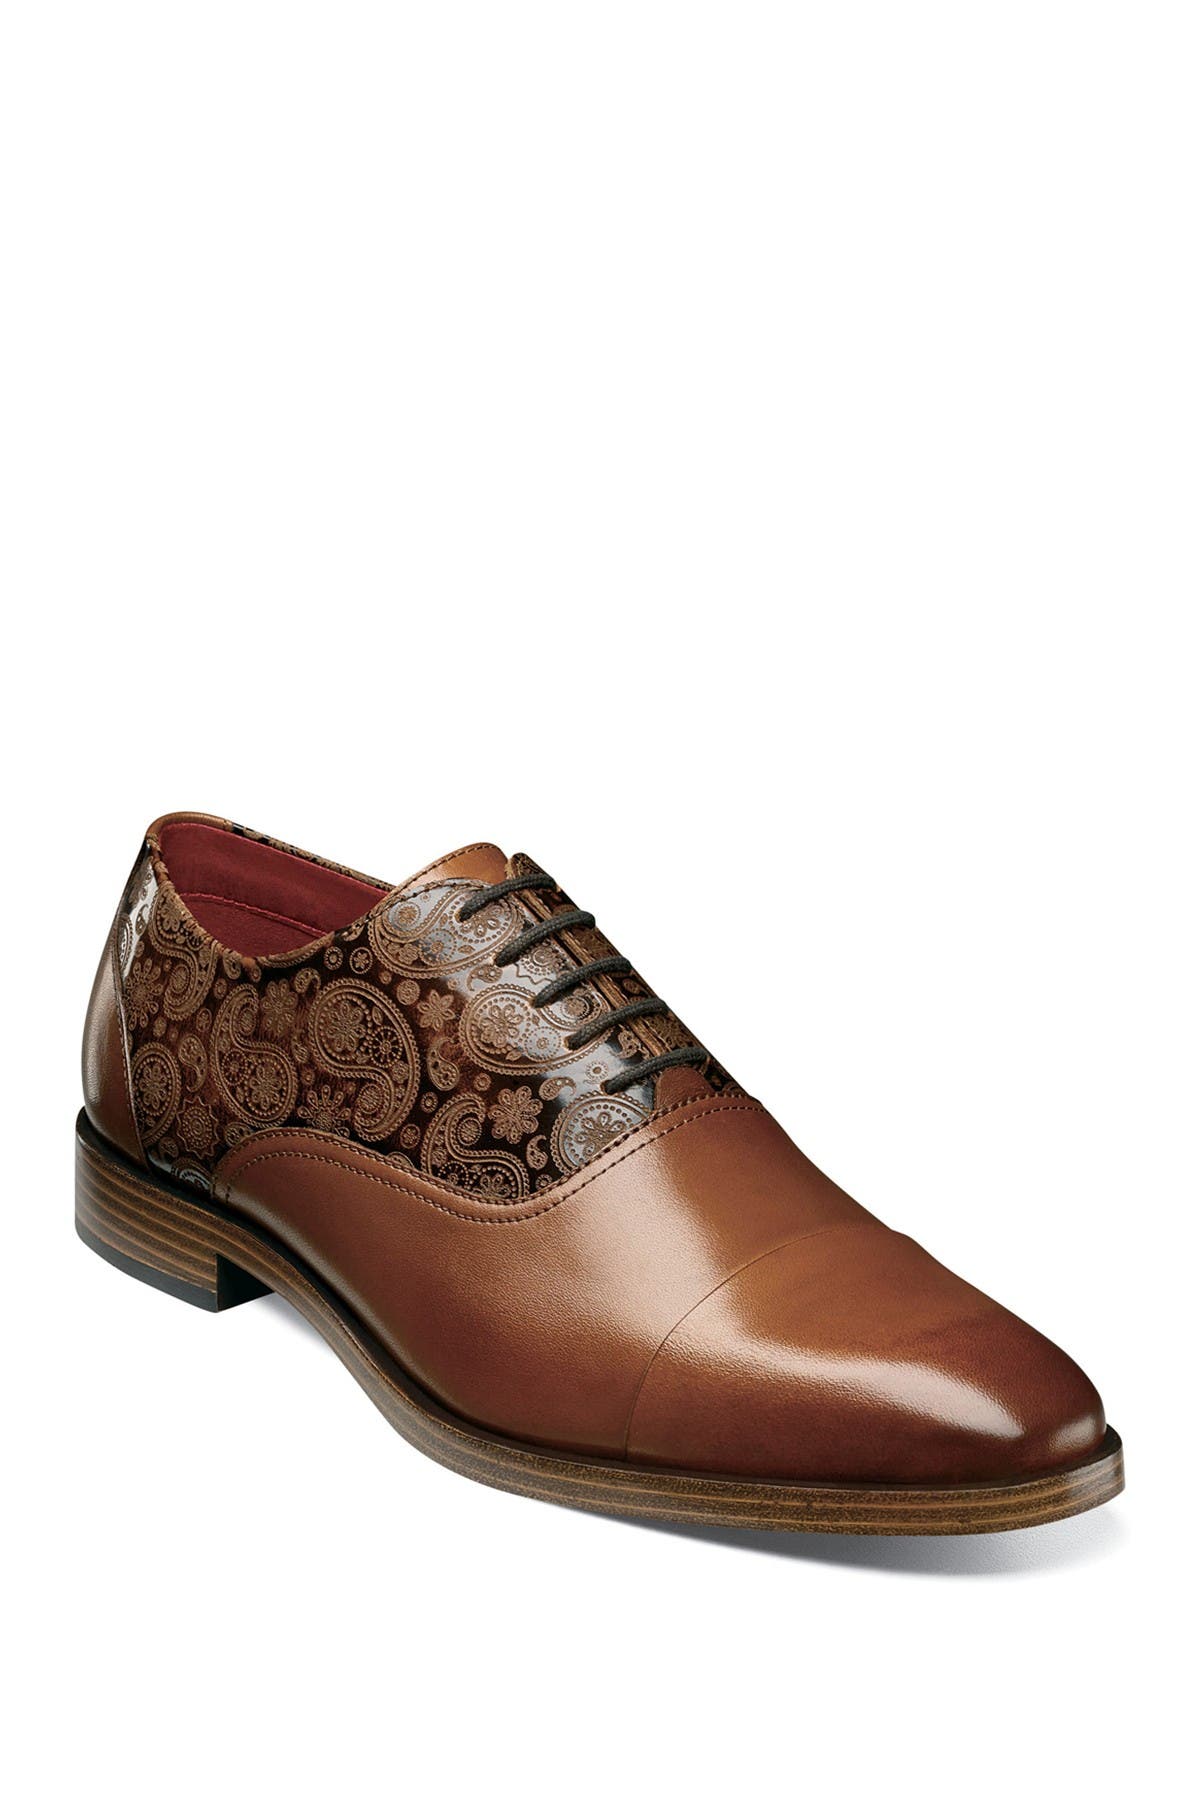 Stacy Adams Quince Paisley Cap Toe Leather Oxford In Tan